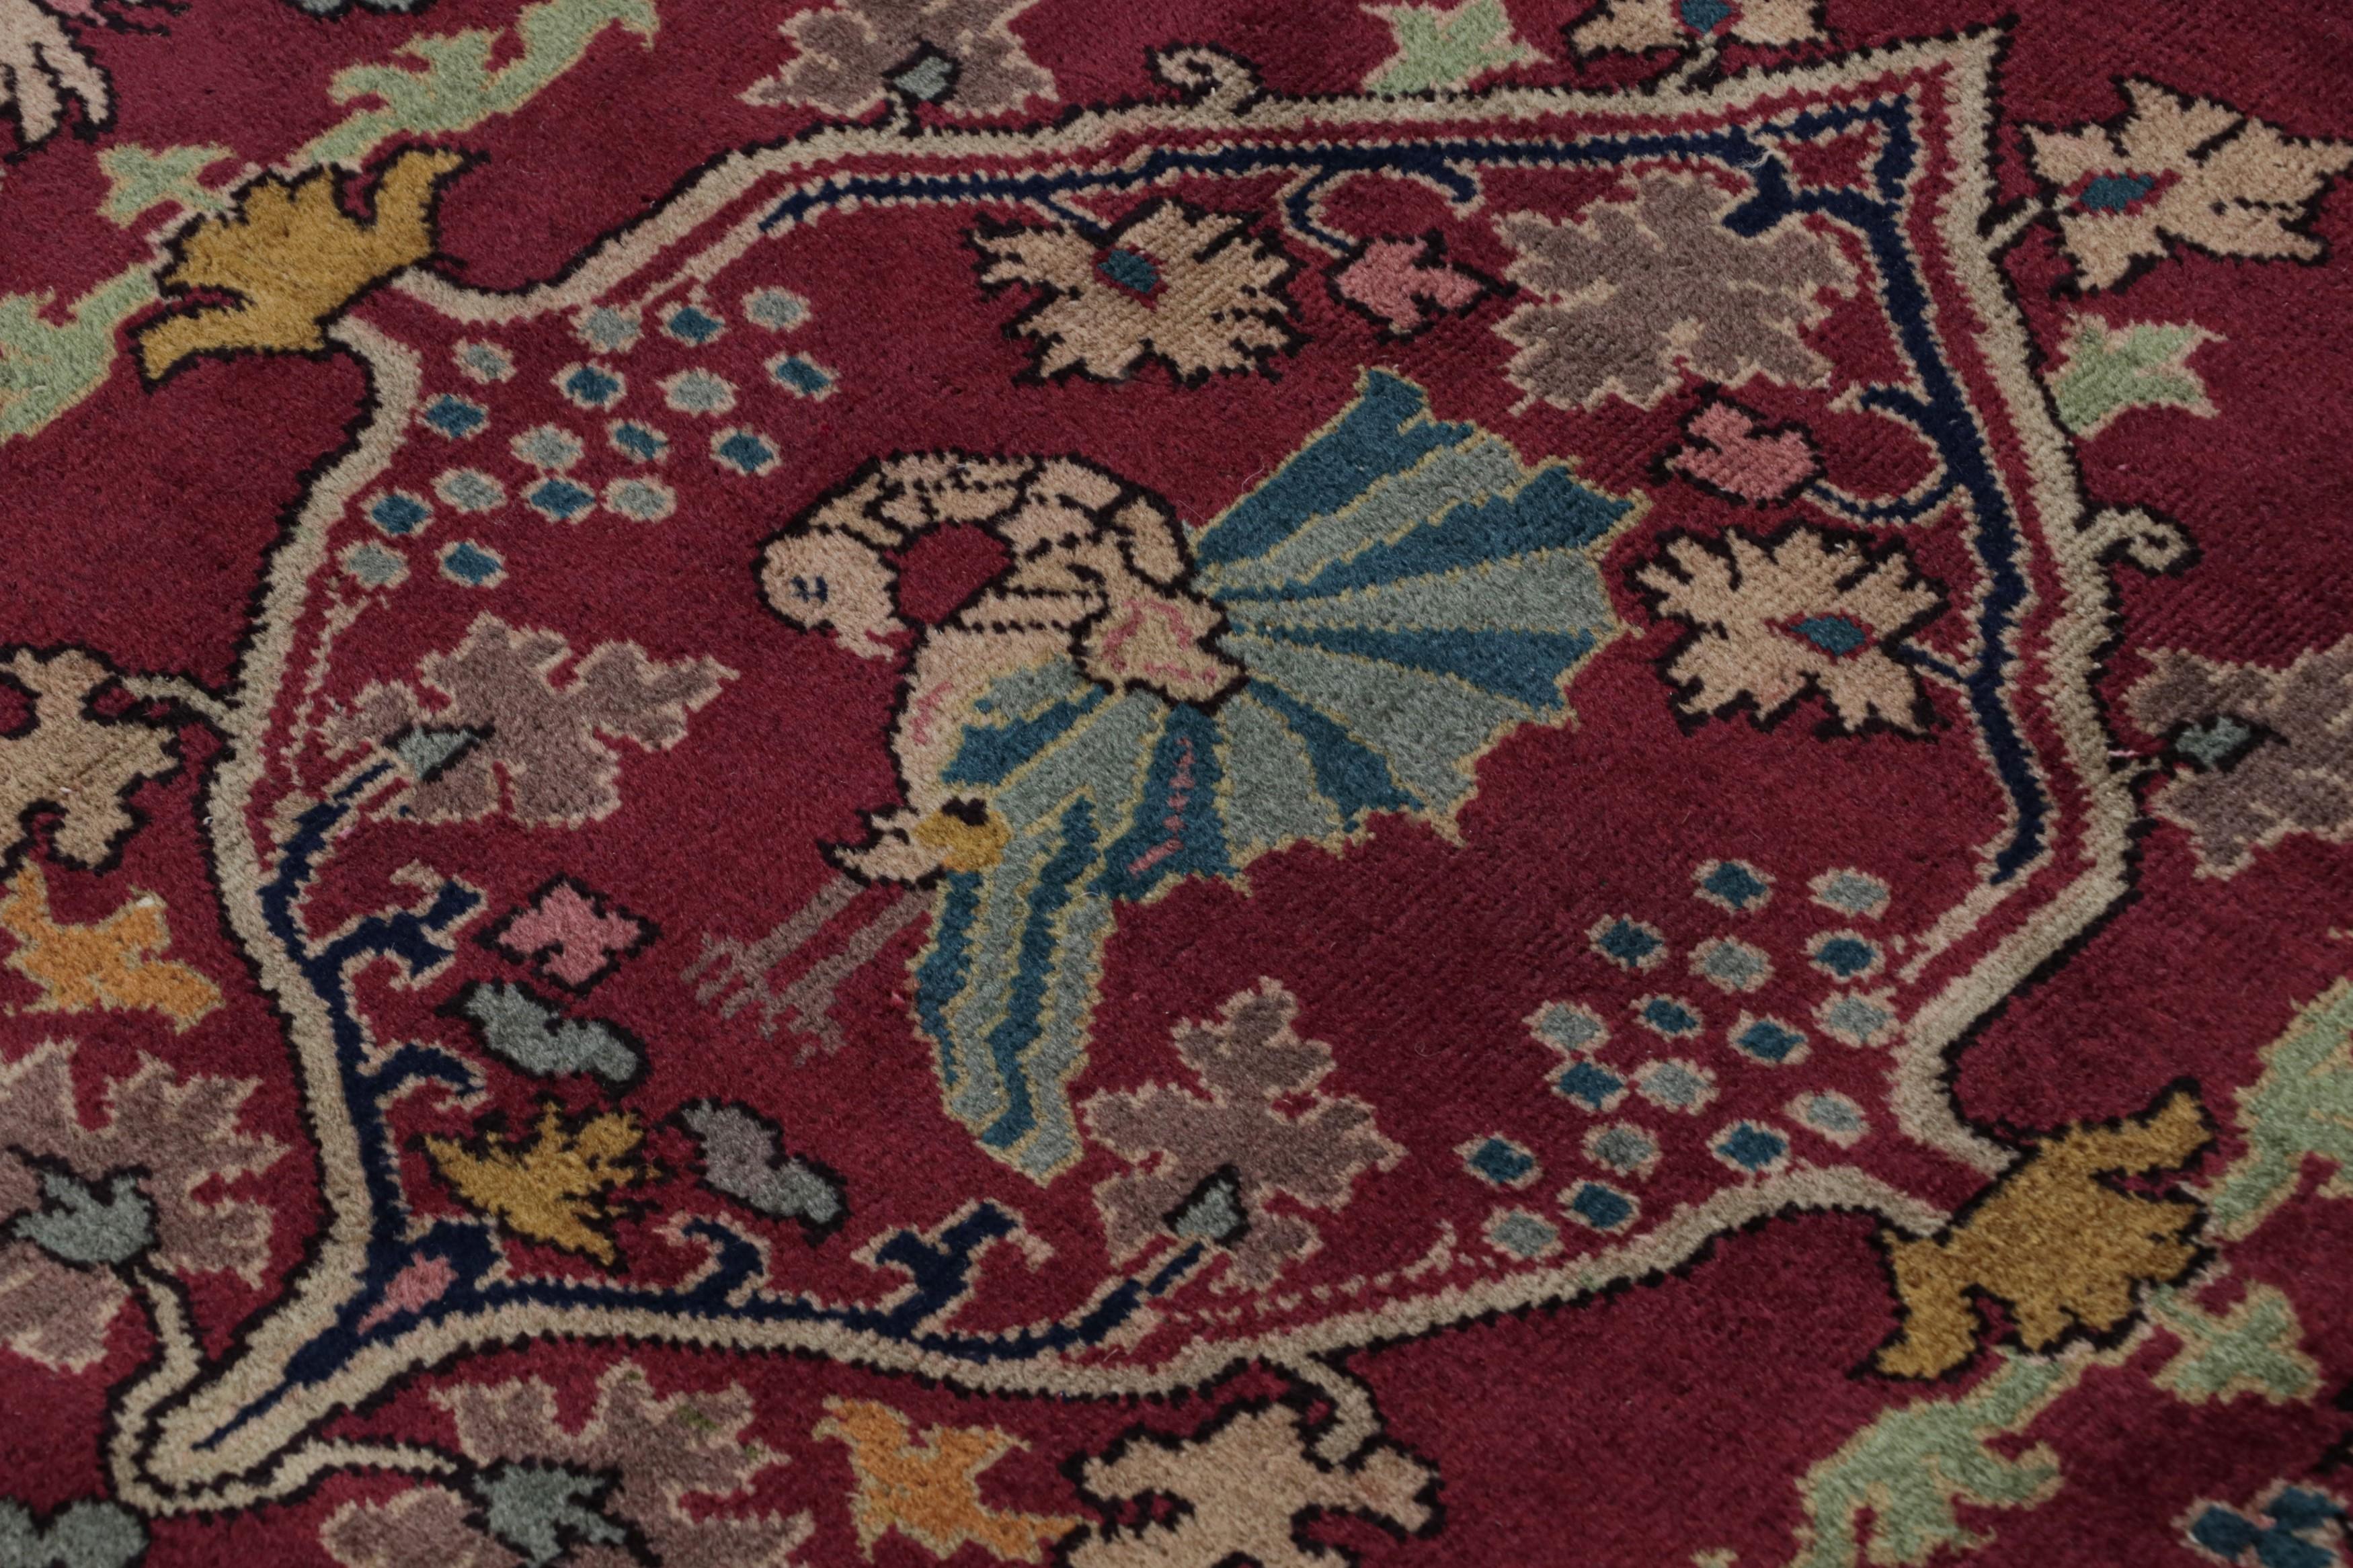 Early 20th Century Antique Indian Rug in Burgundy and Gold with Floral Patterns For Sale